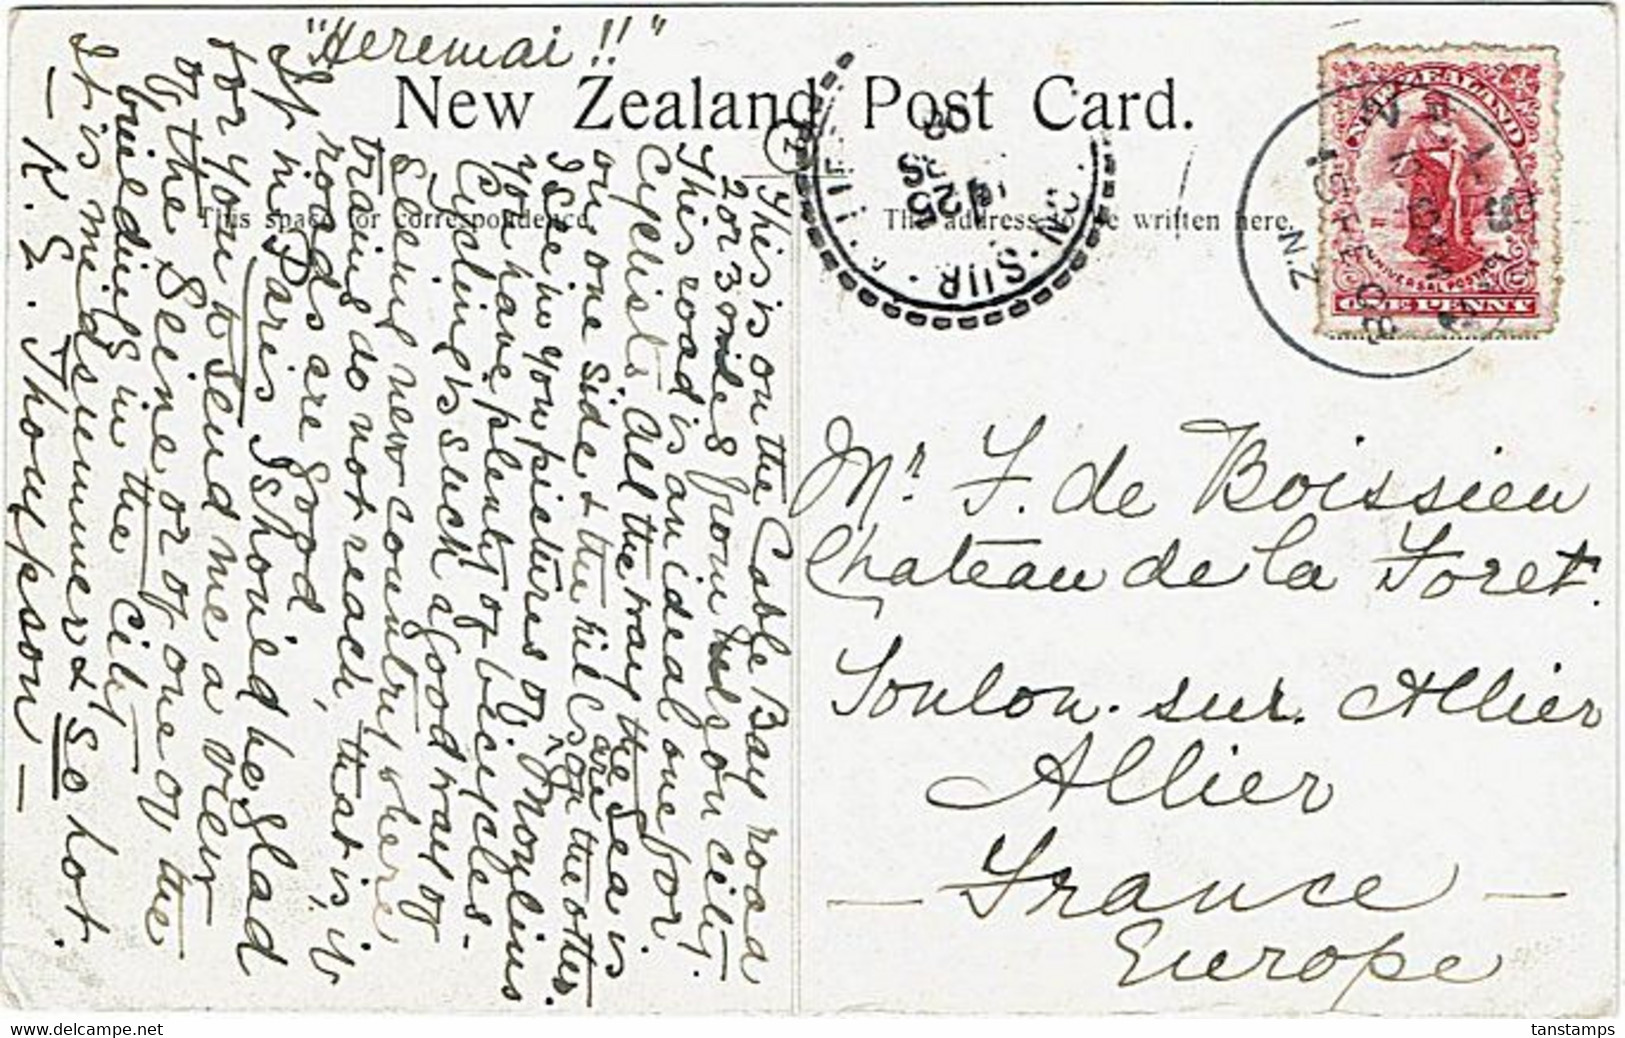 NEW ZEALAND - FRANCE OLDHAM'S CREEK NELSON POSTCARD 1908 - Covers & Documents